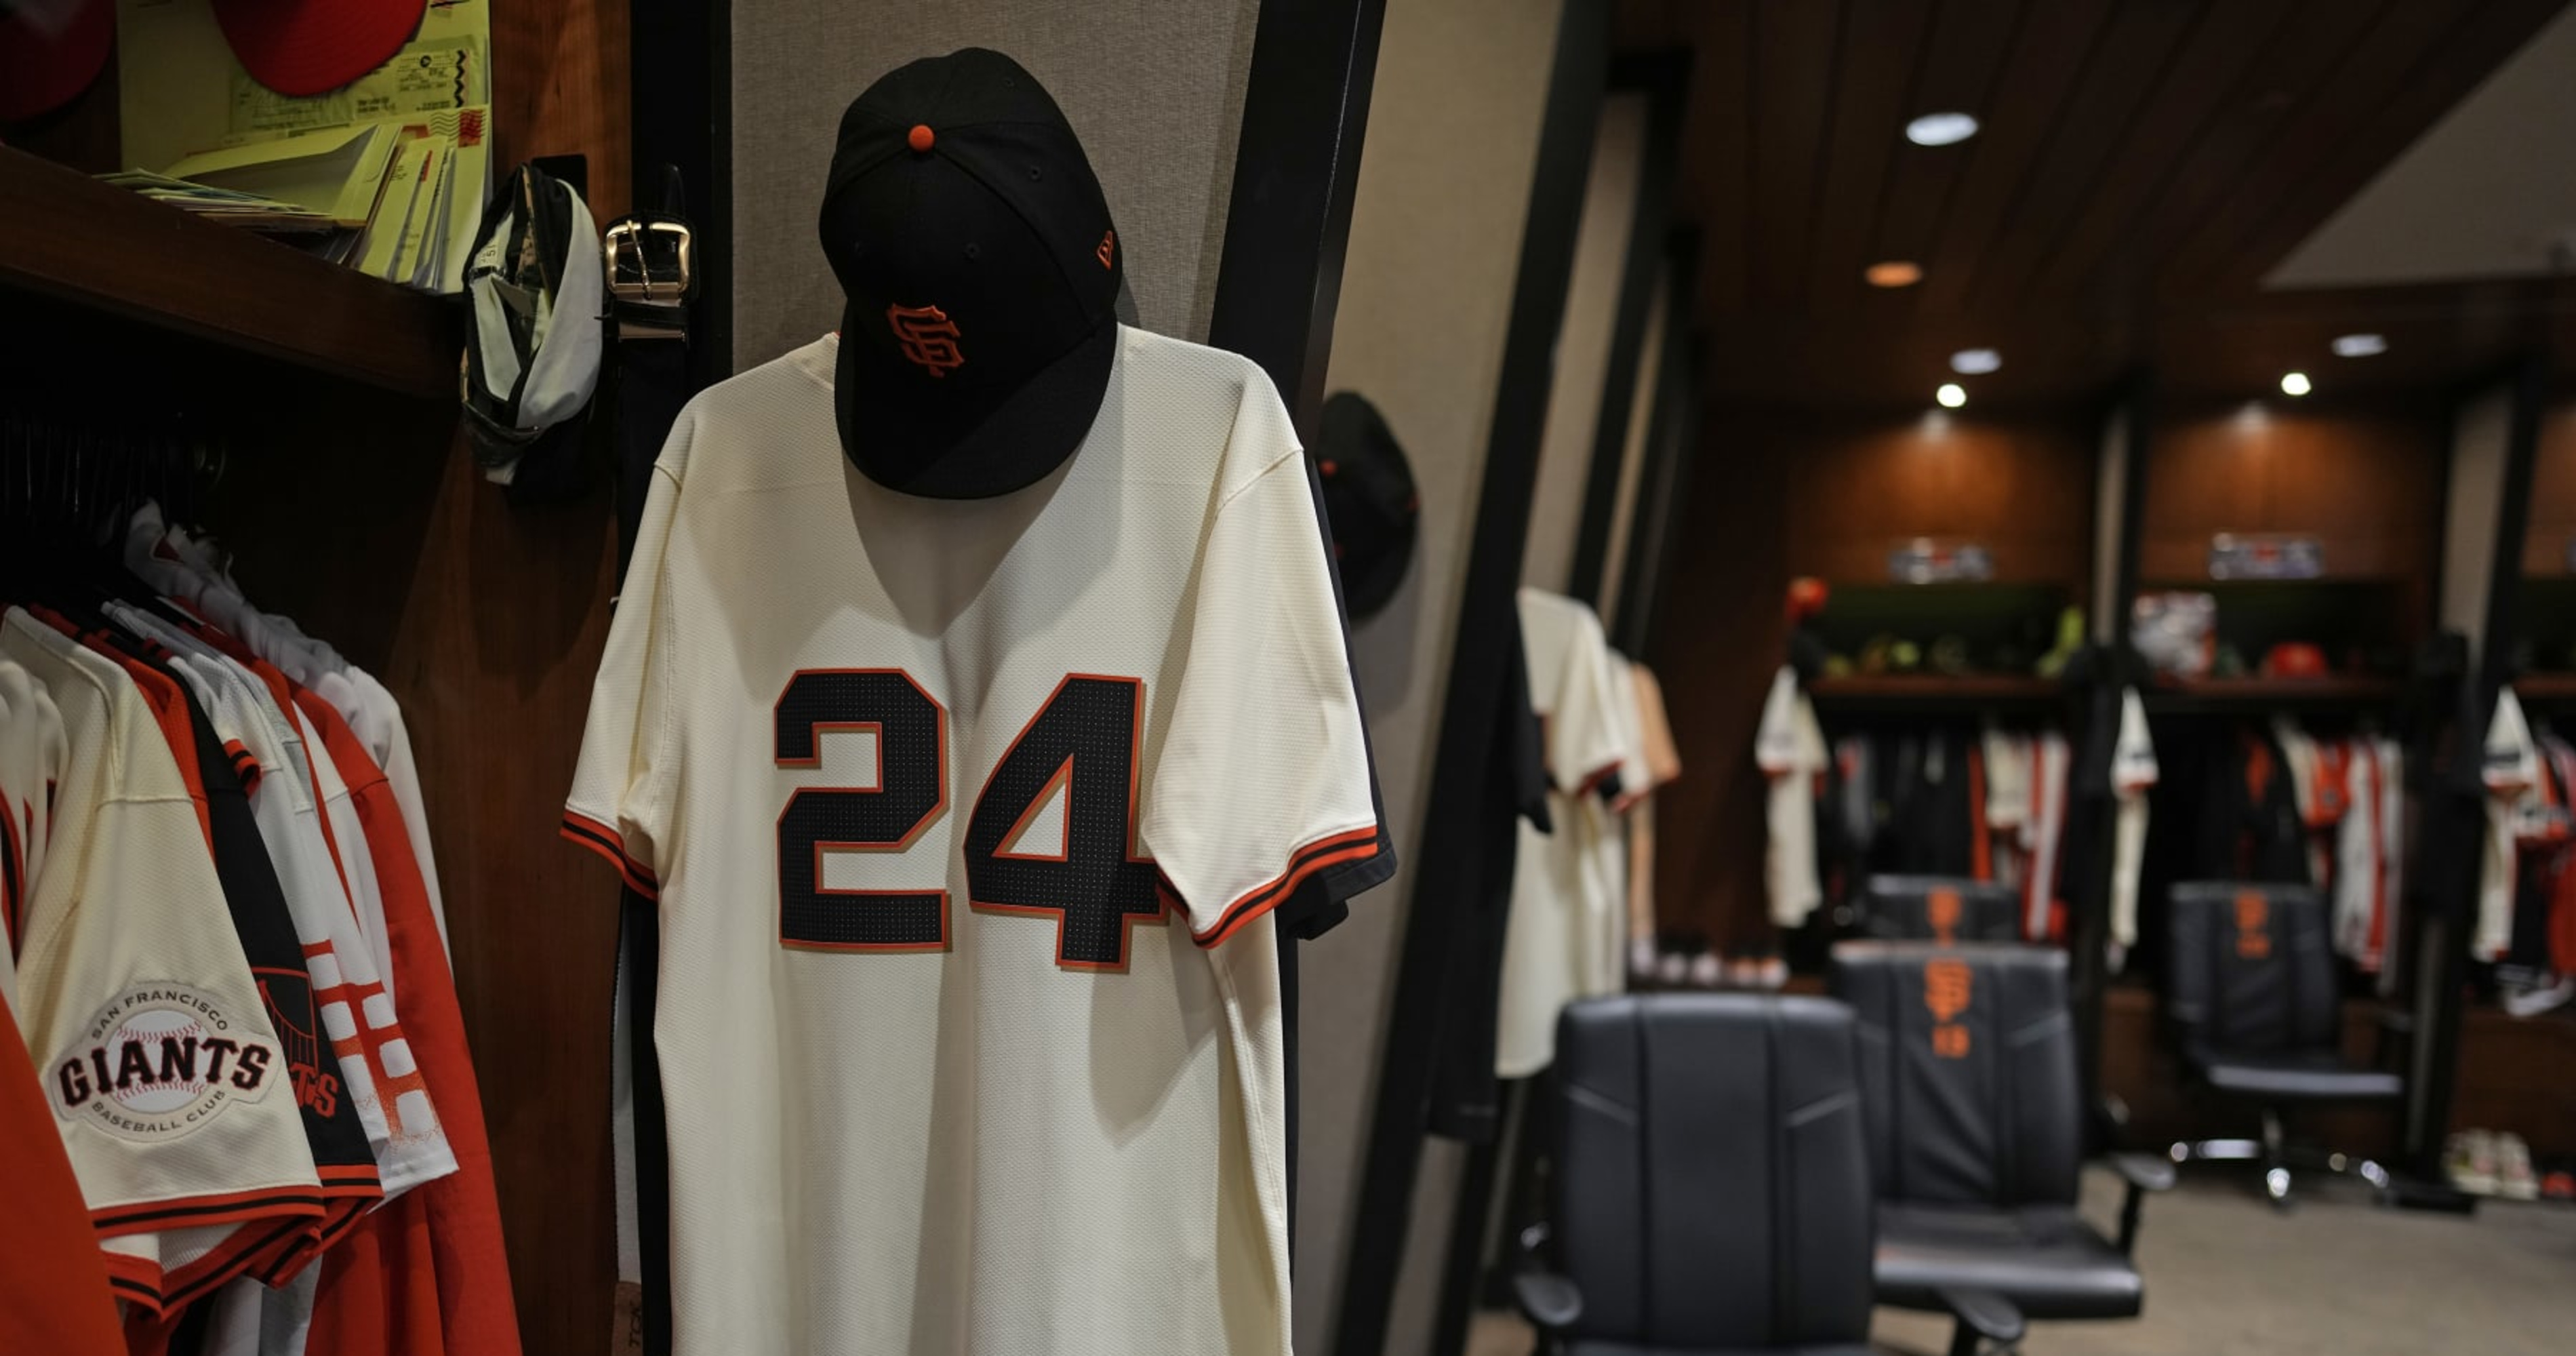 TMZ: Willie Mays' Autographed Jersey from 1969 All-Star Game to Be Sold at Auction